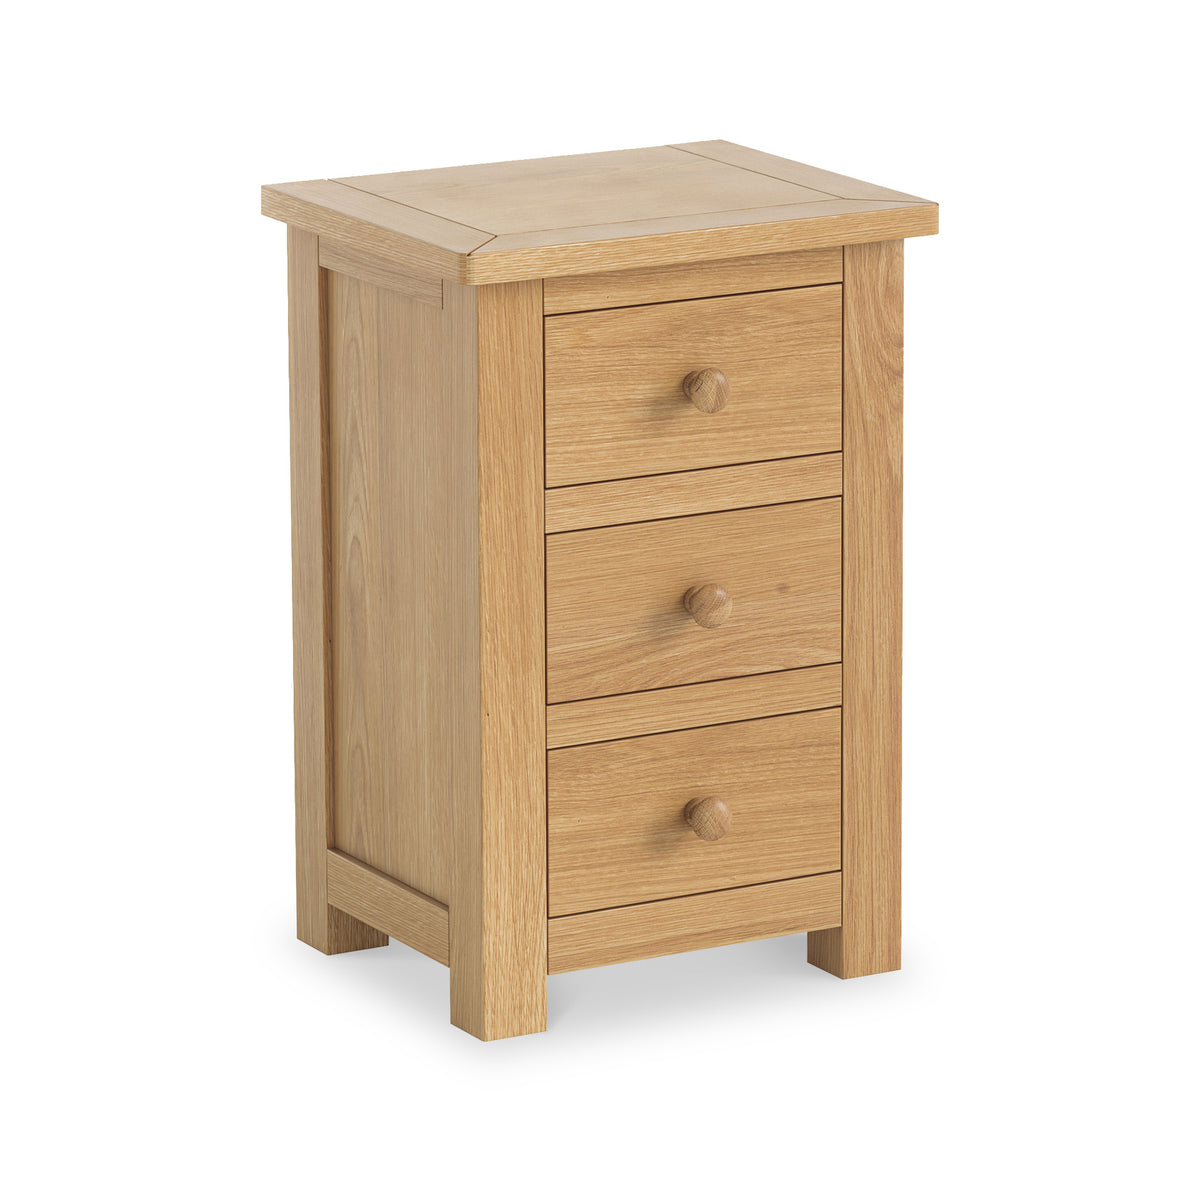 Duchy Oak 3 Drawer Bedside Table from Roseland Furniture